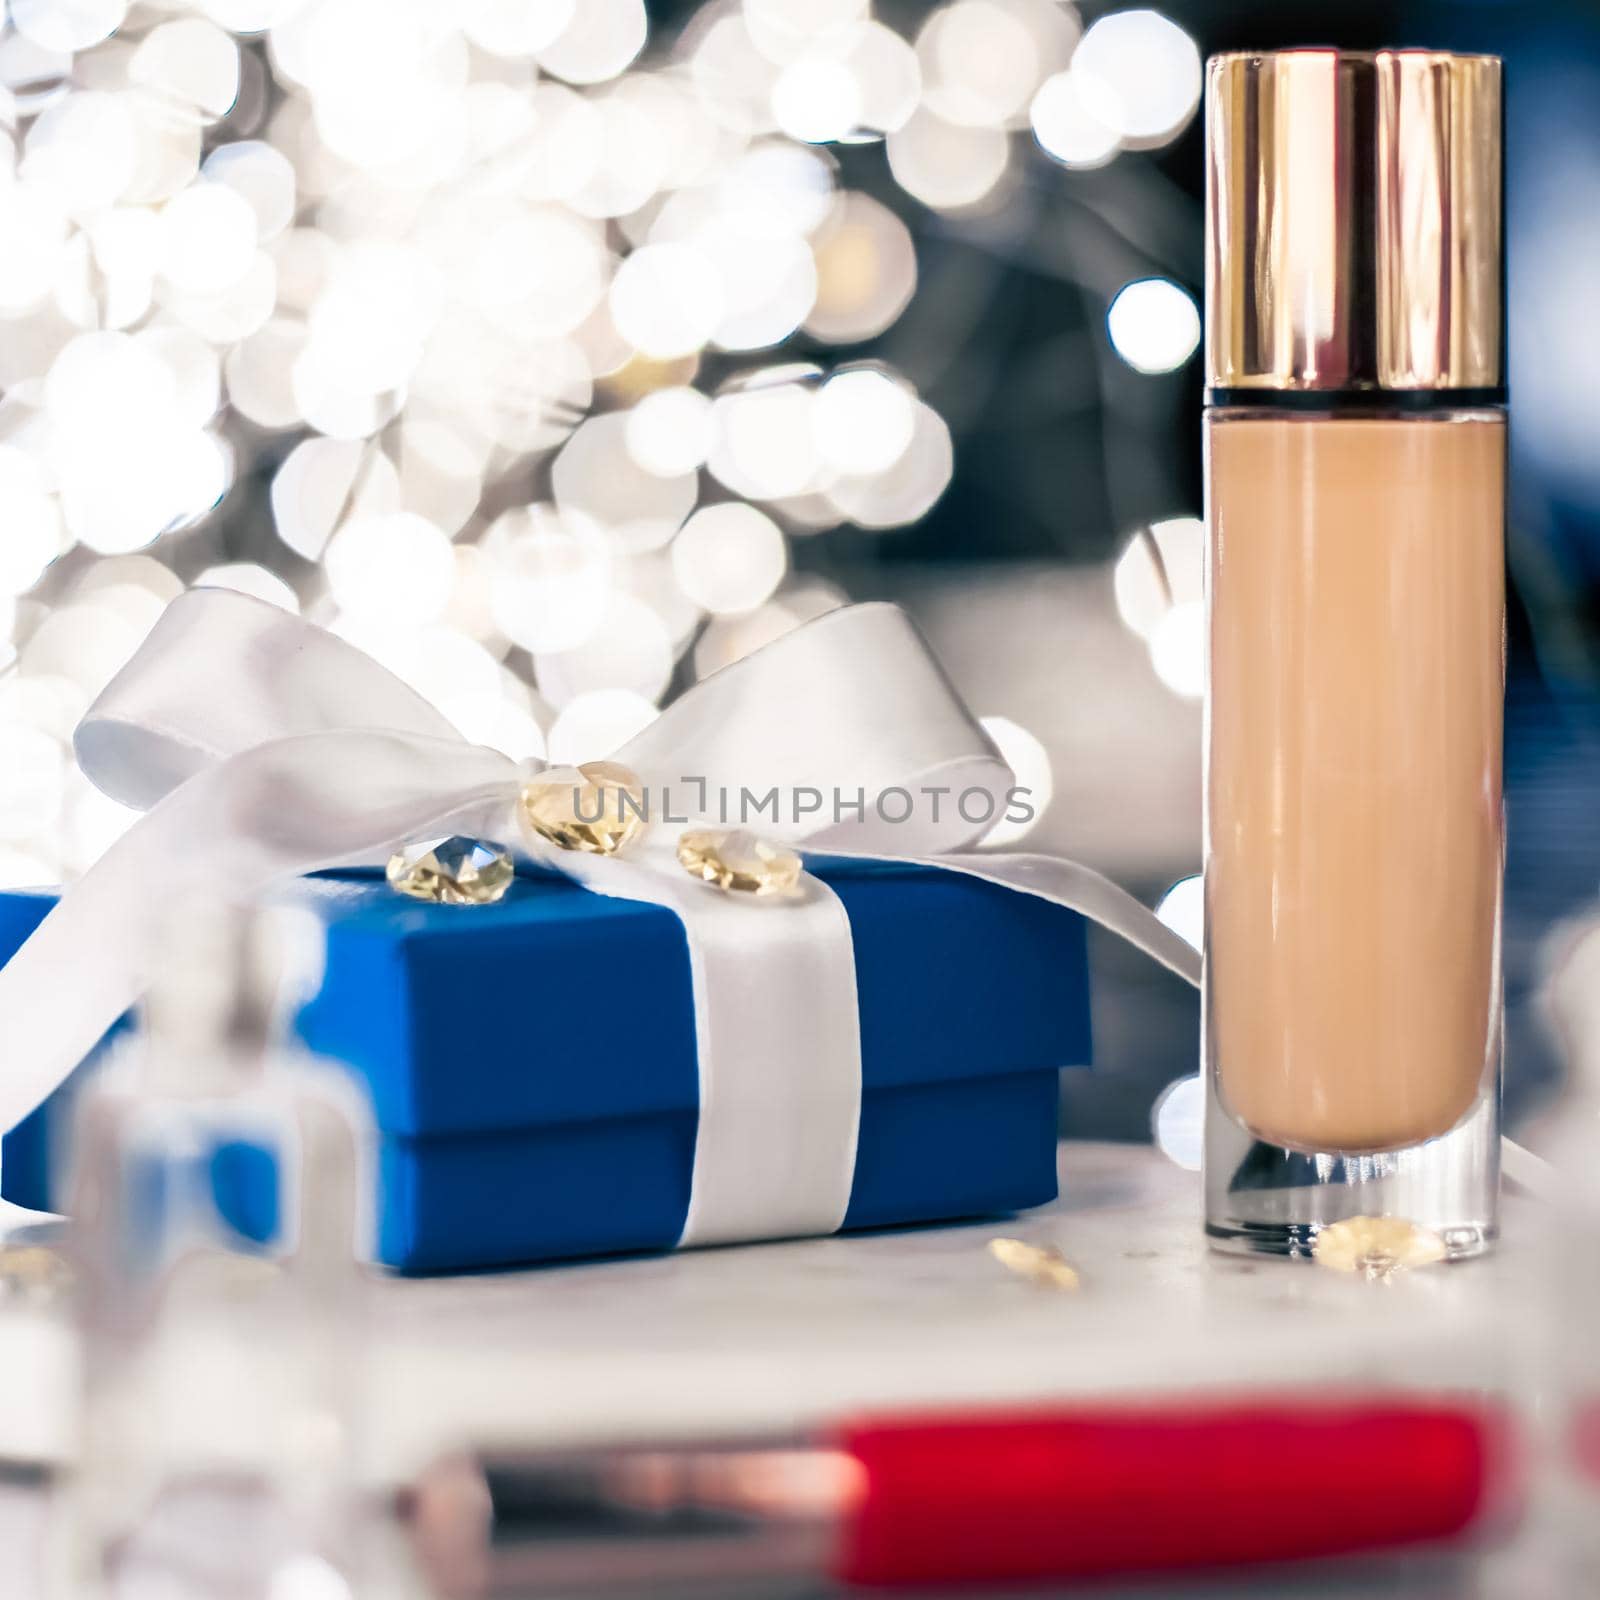 Holiday make-up foundation base, concealer and blue gift box, luxury cosmetics present and blank label products for beauty brand design by Anneleven